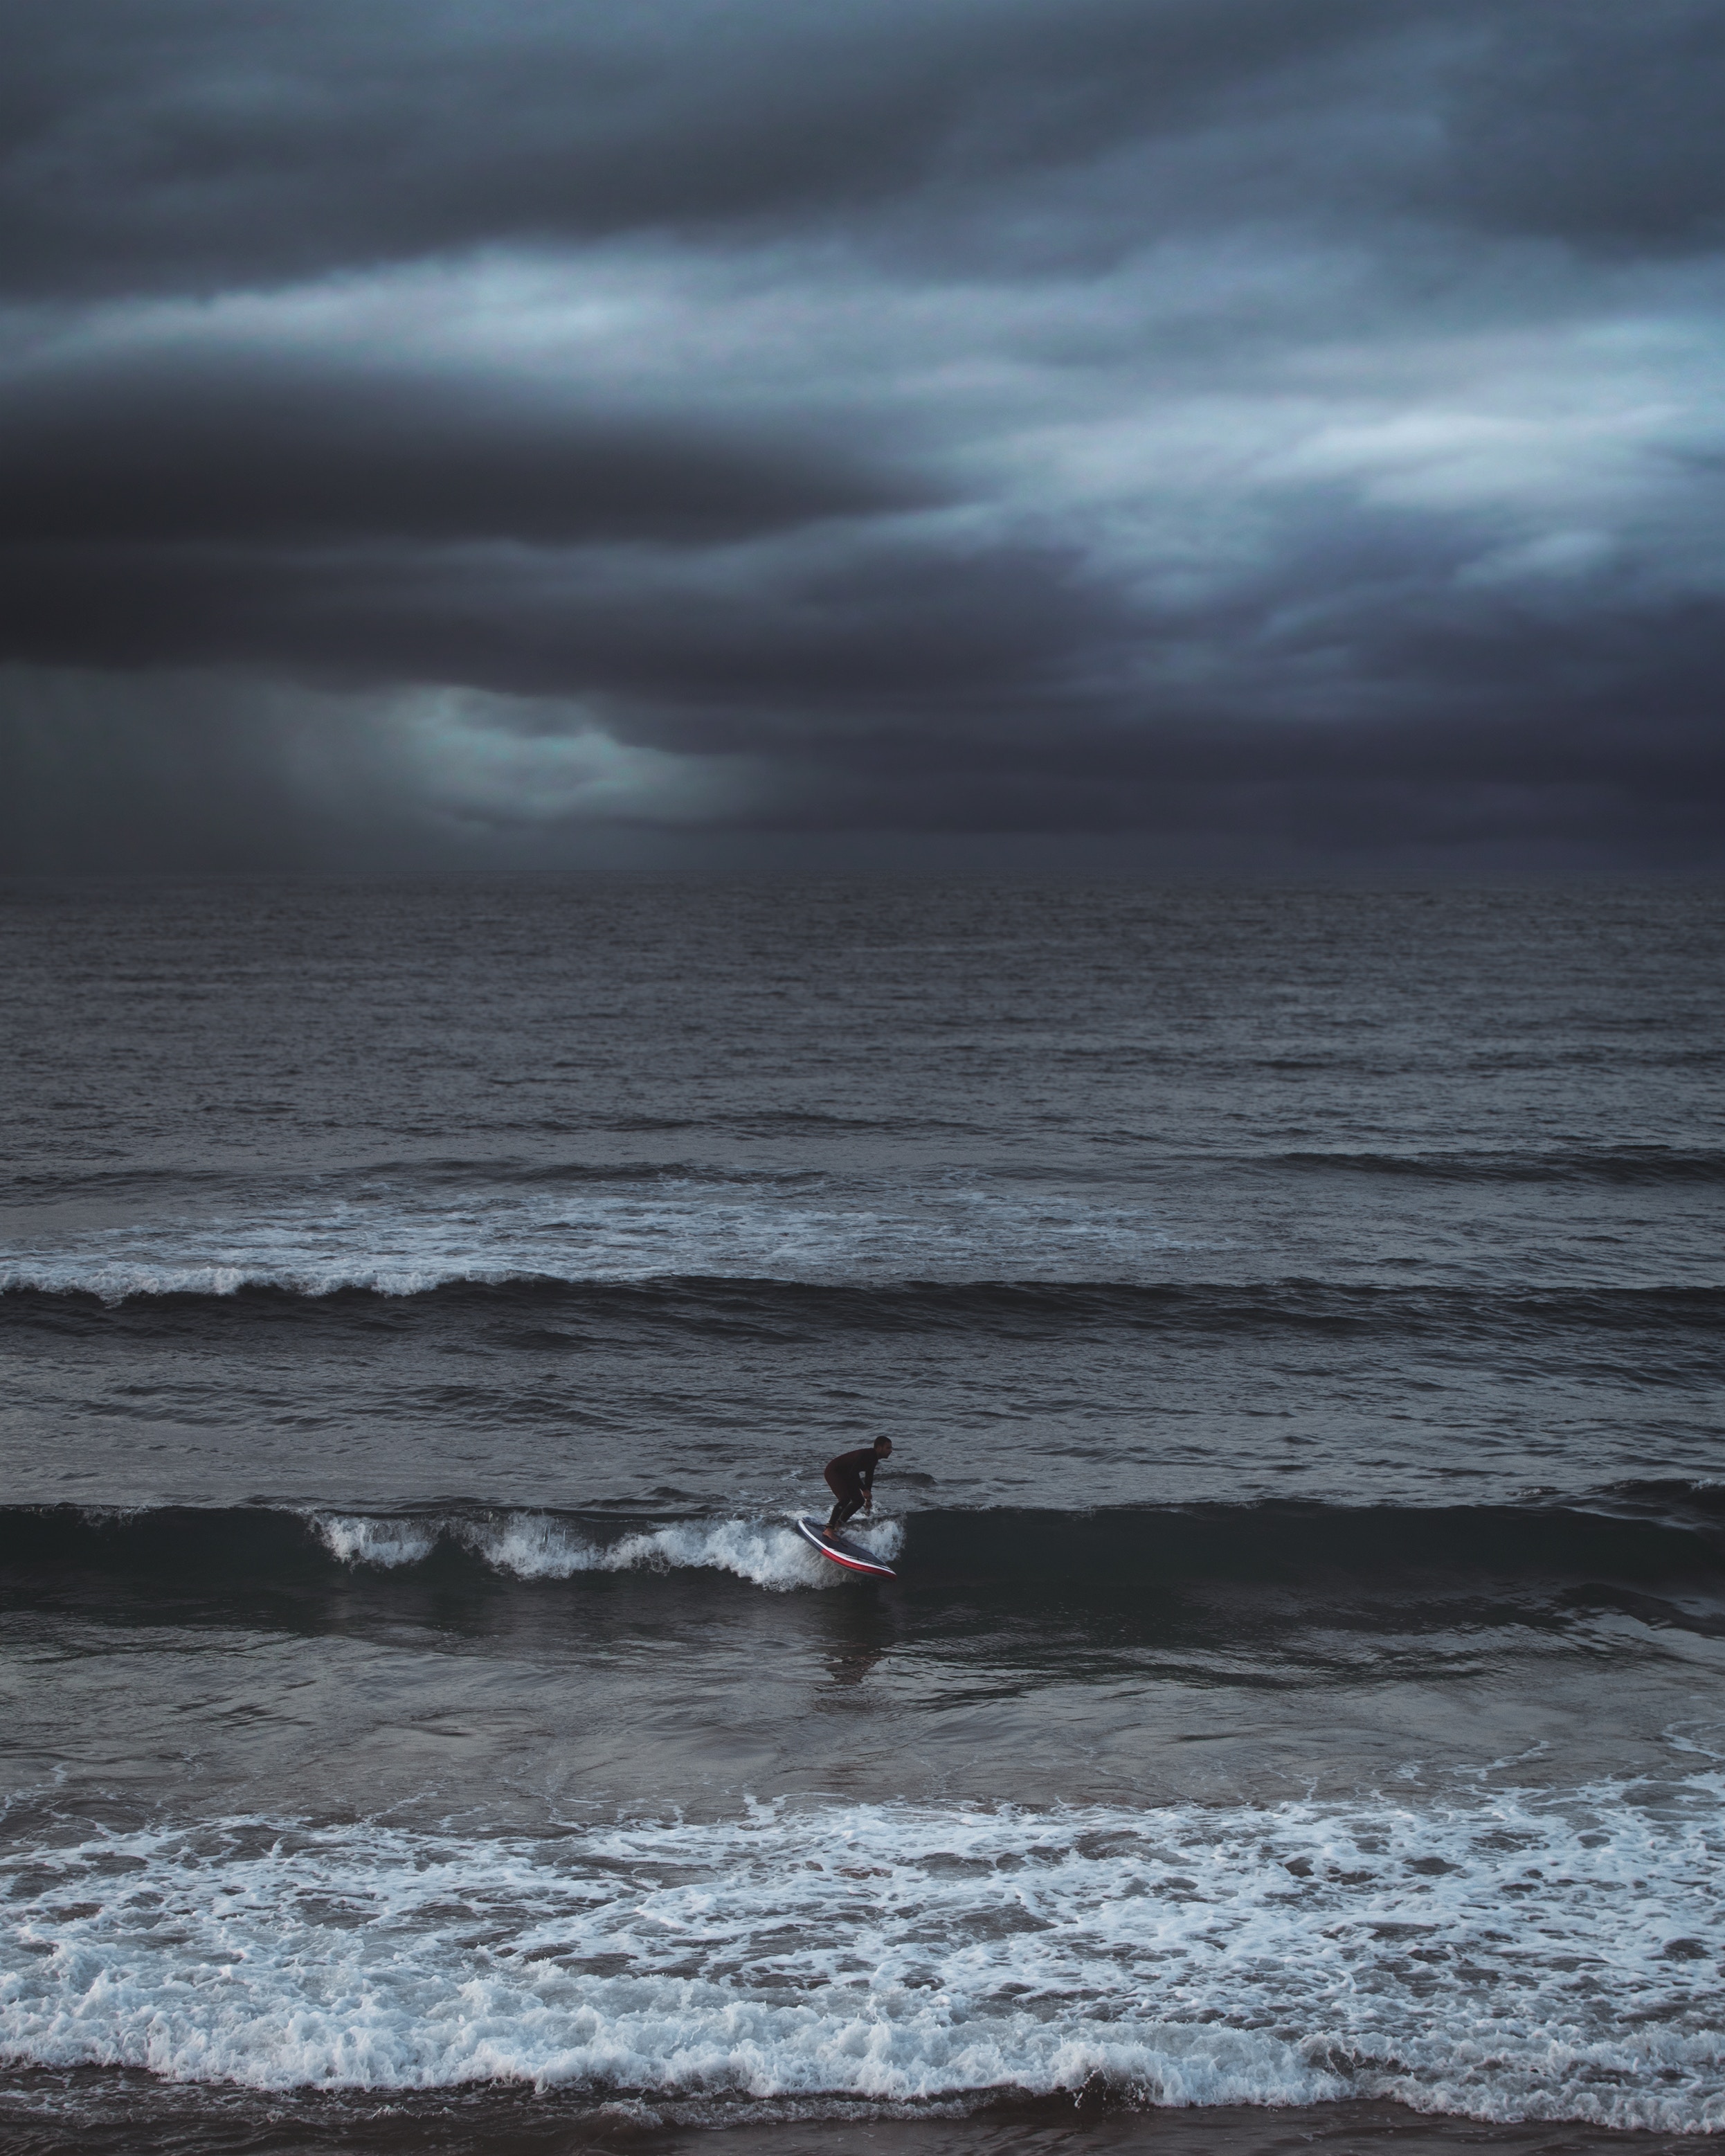 Mobile wallpaper sea, serfing, sports, waves, ocean, mainly cloudy, overcast, surfer